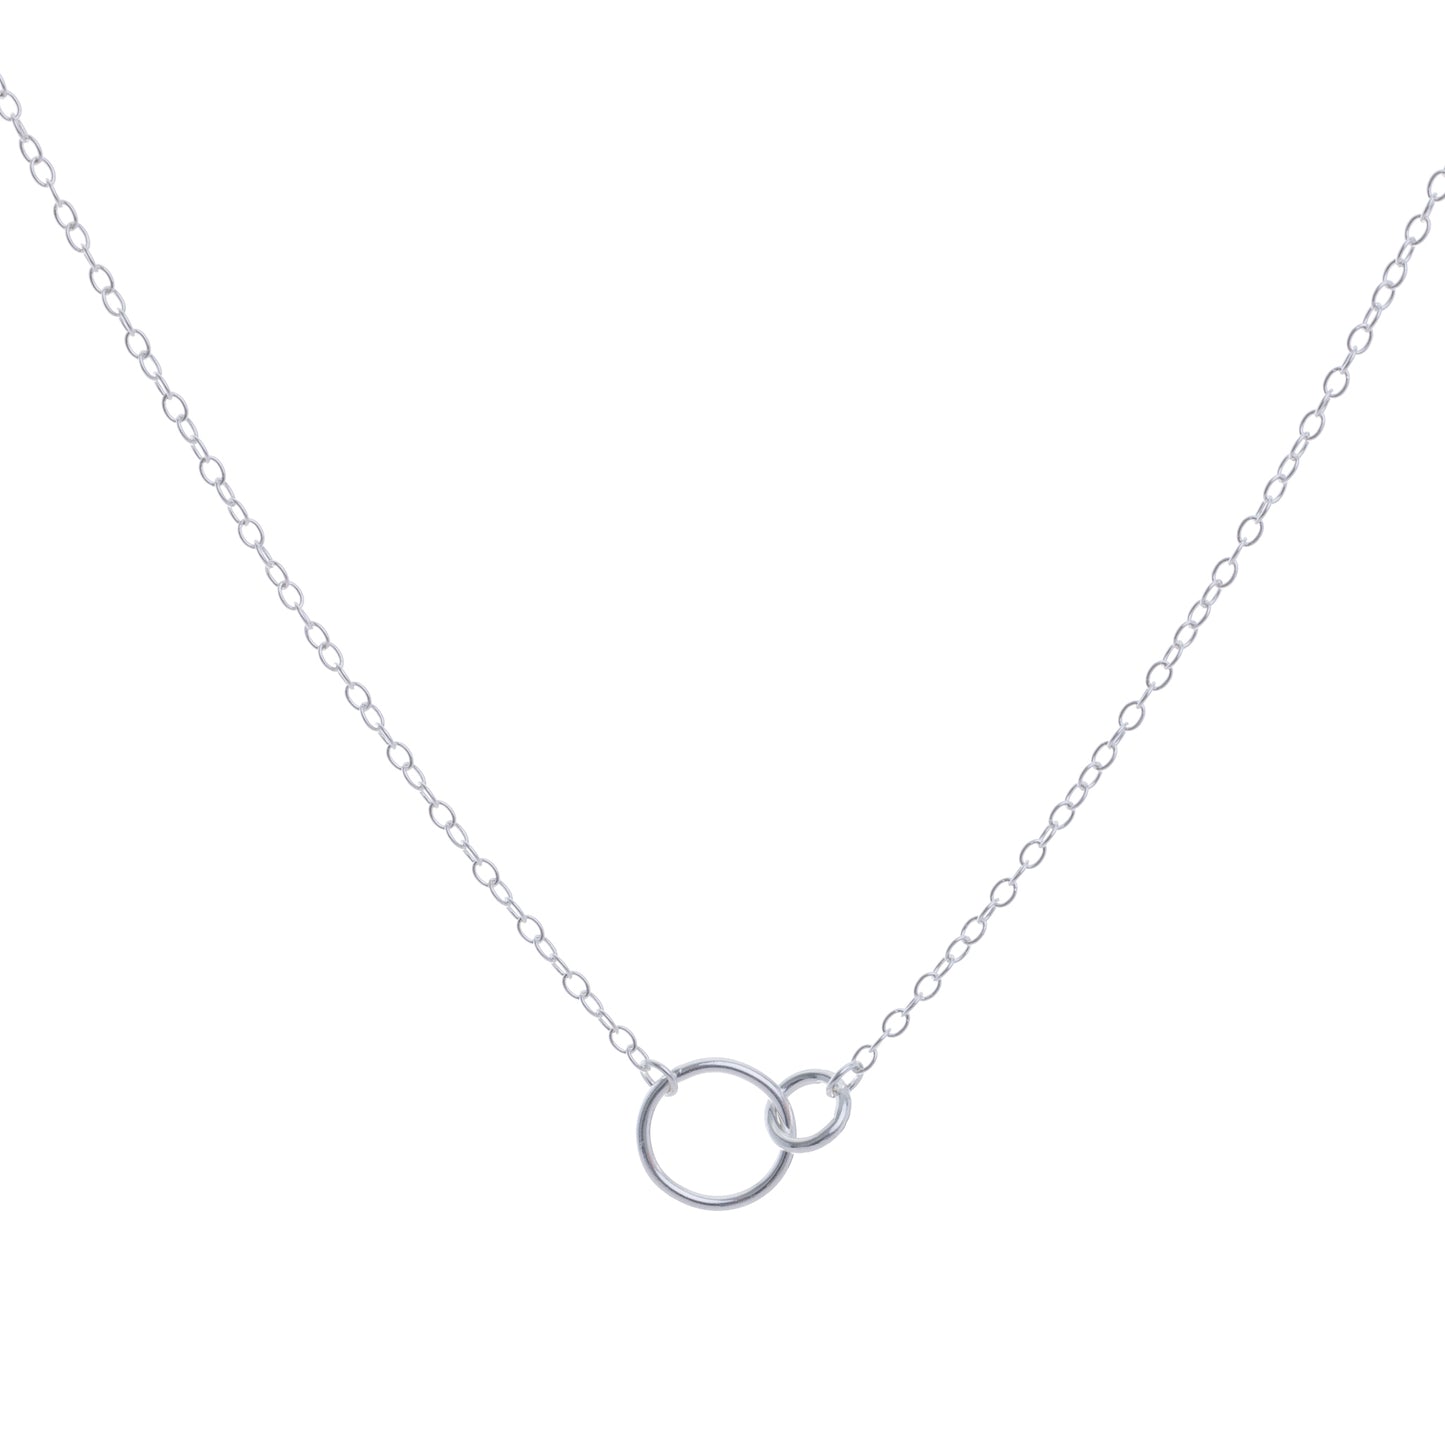 Sustainable Infinity Circles Necklace